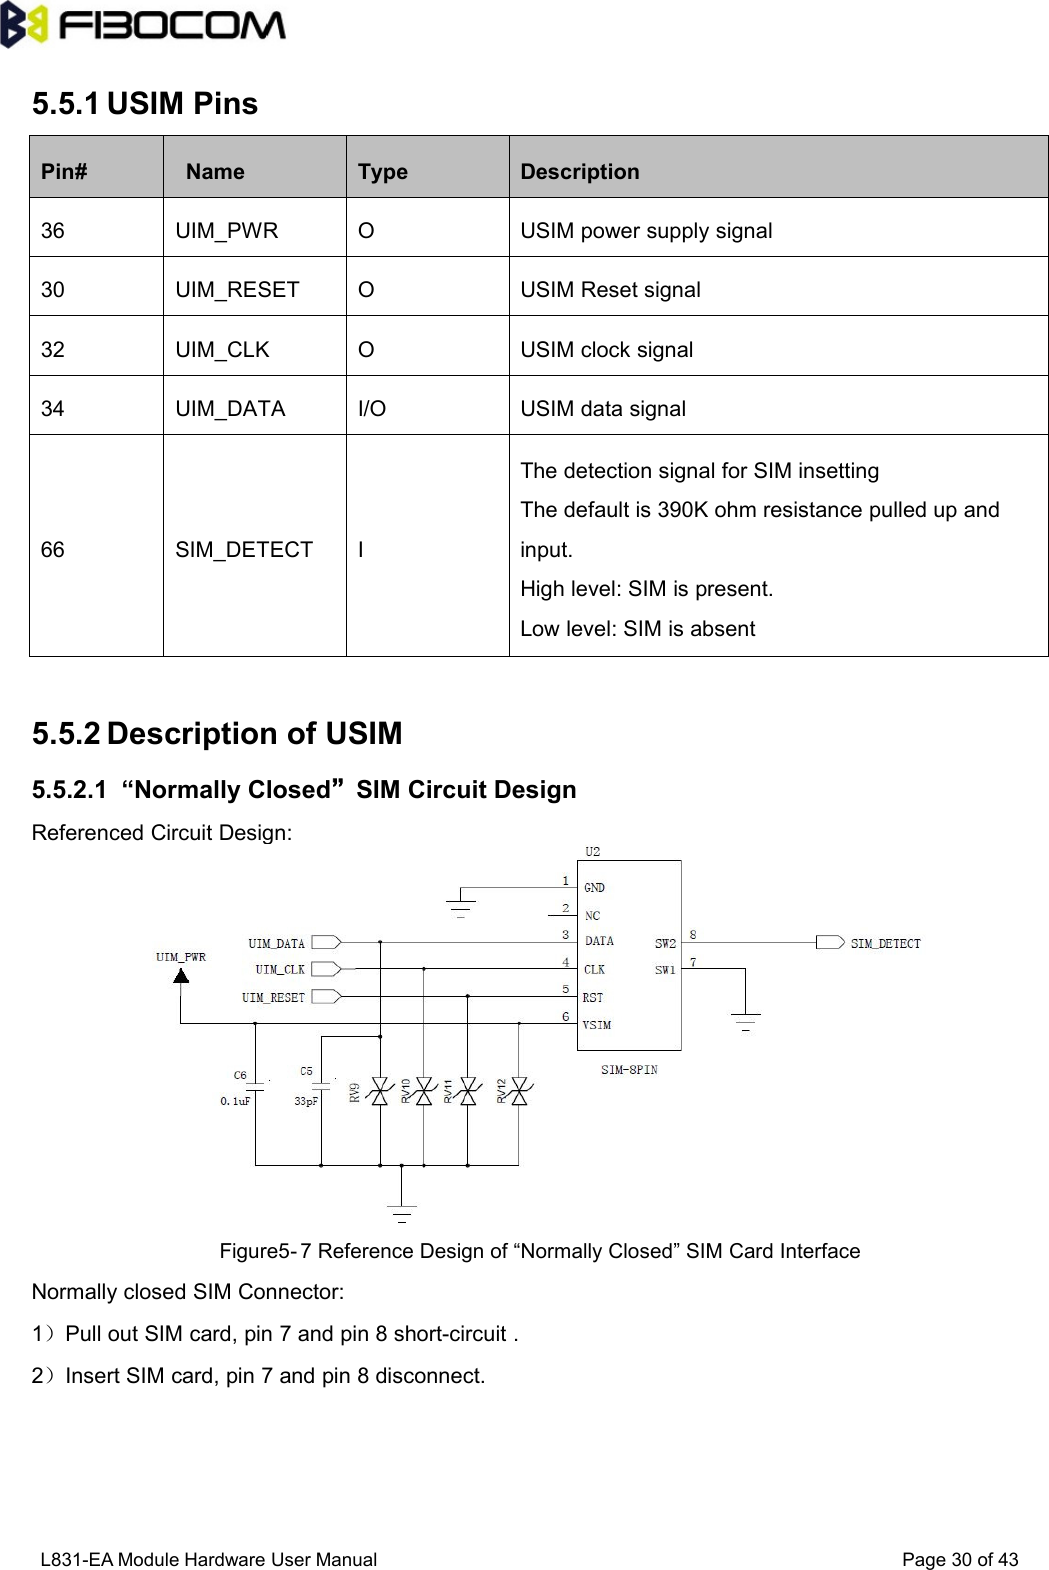 L831-EA Module Hardware User Manual Page30of435.5.1 USIM PinsPin#NameTypeDescription36UIM_PWROUSIM power supply signal30UIM_RESETOUSIM Reset signal32UIM_CLKOUSIM clock signal34UIM_DATAI/OUSIM data signal66SIM_DETECTIThe detection signal for SIM insettingThe default is 390K ohm resistance pulled up andinput.High level: SIM is present.Low level: SIM is absent5.5.2 Description of USIM5.5.2.1 “Normally Closed”SIM Circuit DesignReferenced Circuit Design:Figure5- 7 Reference Design of “Normally Closed” SIM Card InterfaceNormally closed SIM Connector:1）Pull out SIM card, pin 7 and pin 8 short-circuit .2）Insert SIM card, pin 7 and pin 8 disconnect.